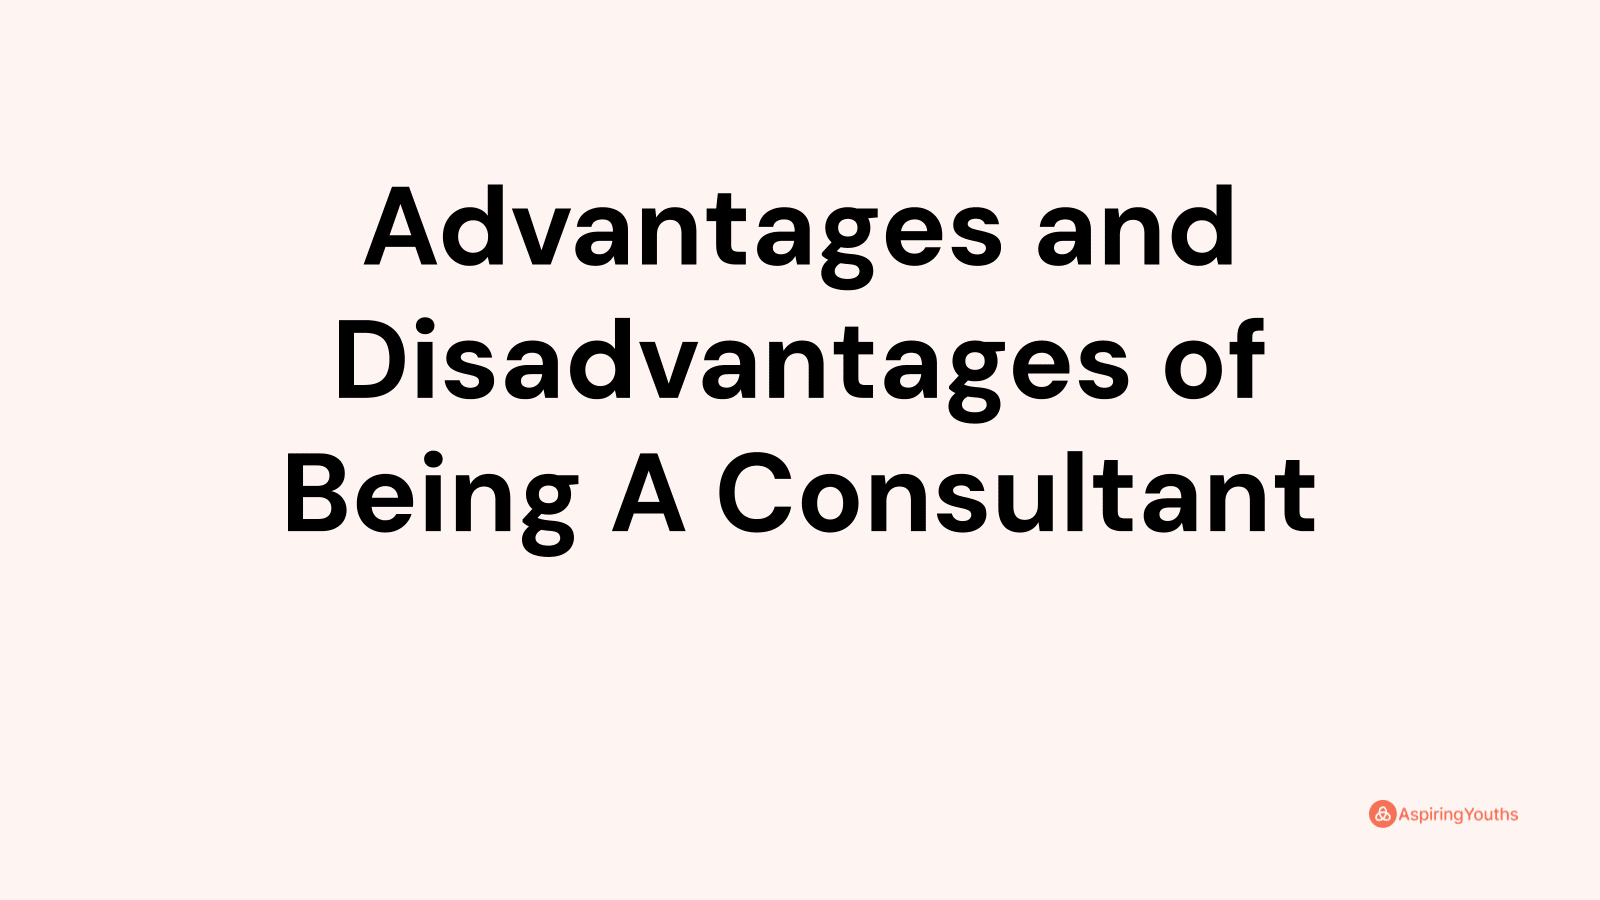 Advantages and disadvantages of Being A Consultant